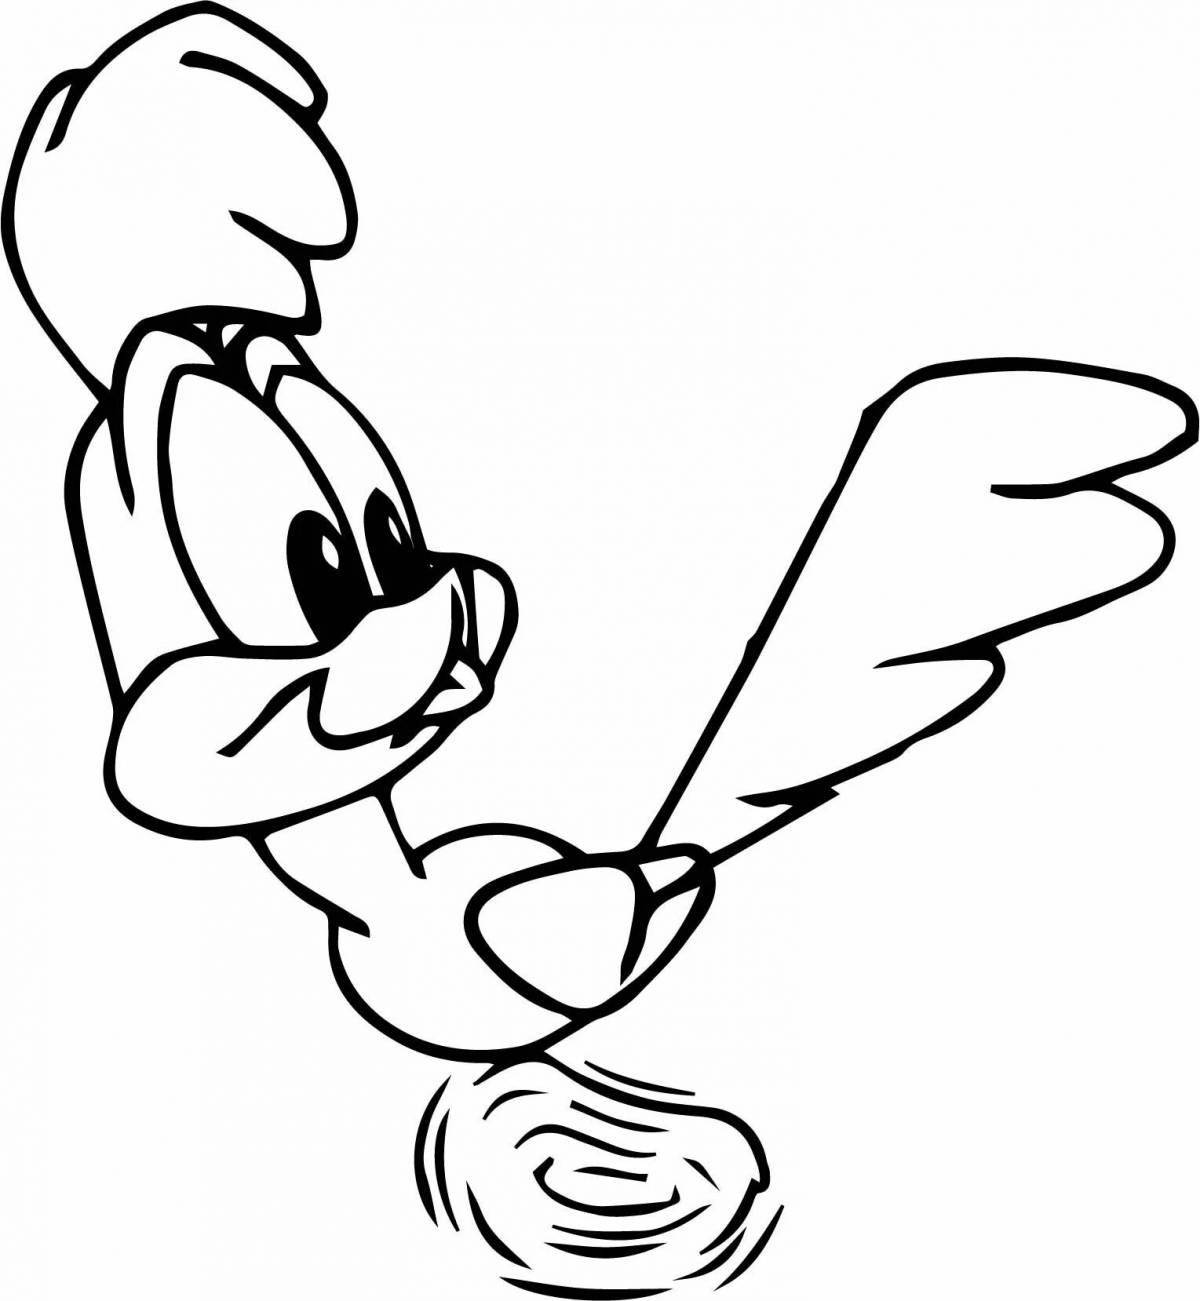 Crazy road runner coloring page